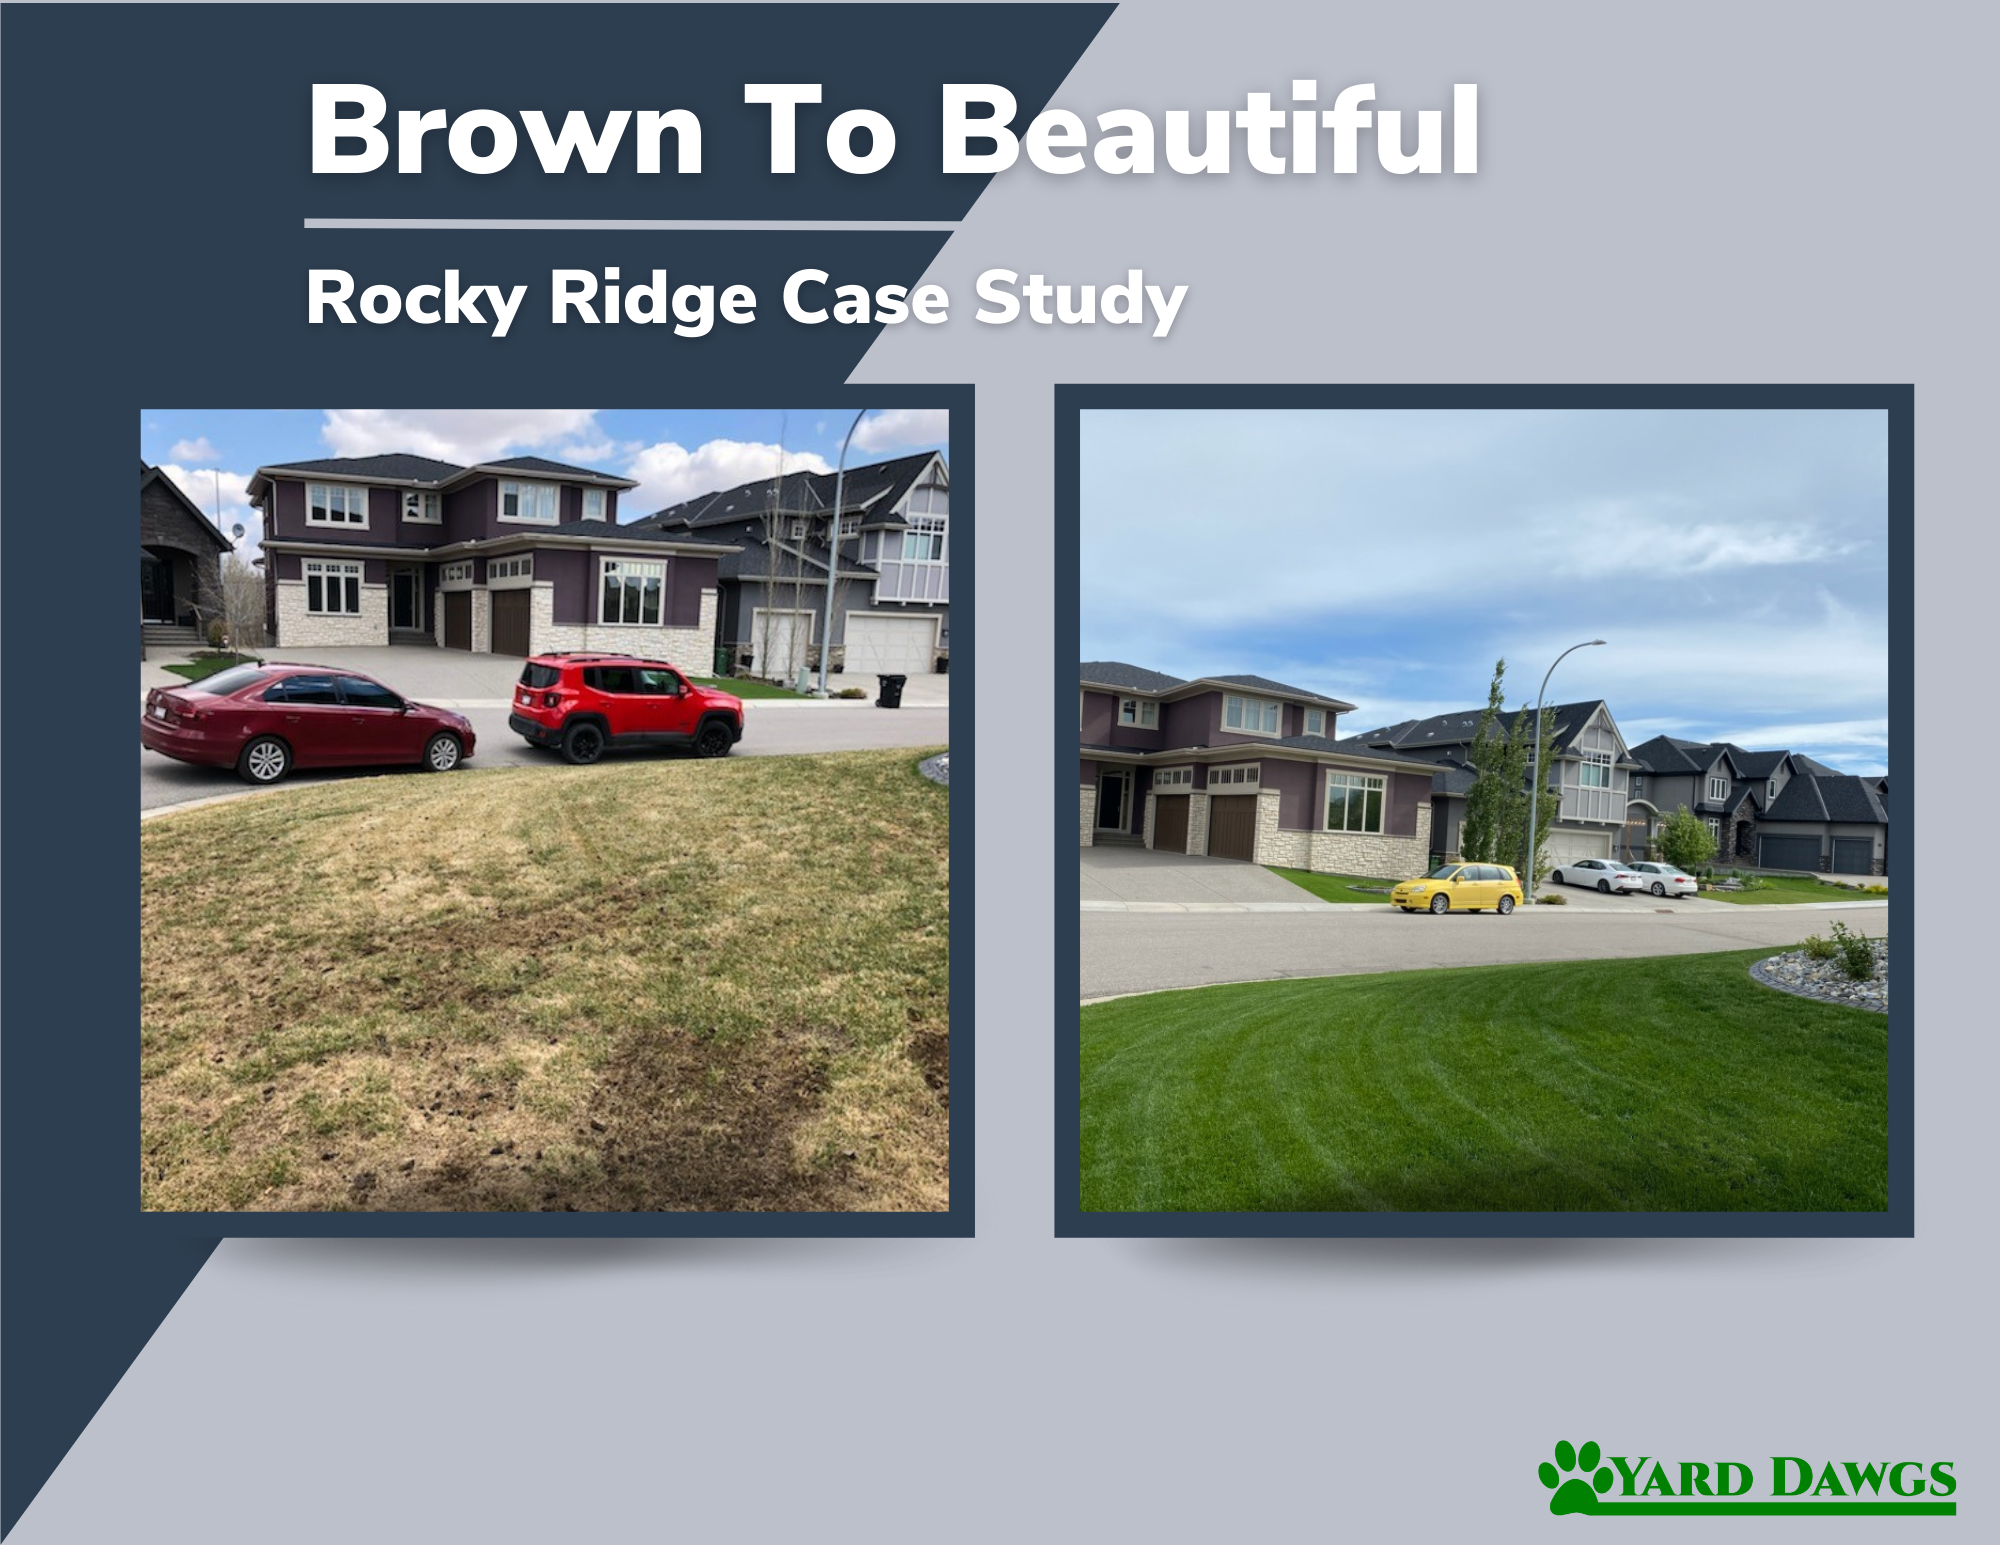 Brown To Beautiful Case Study